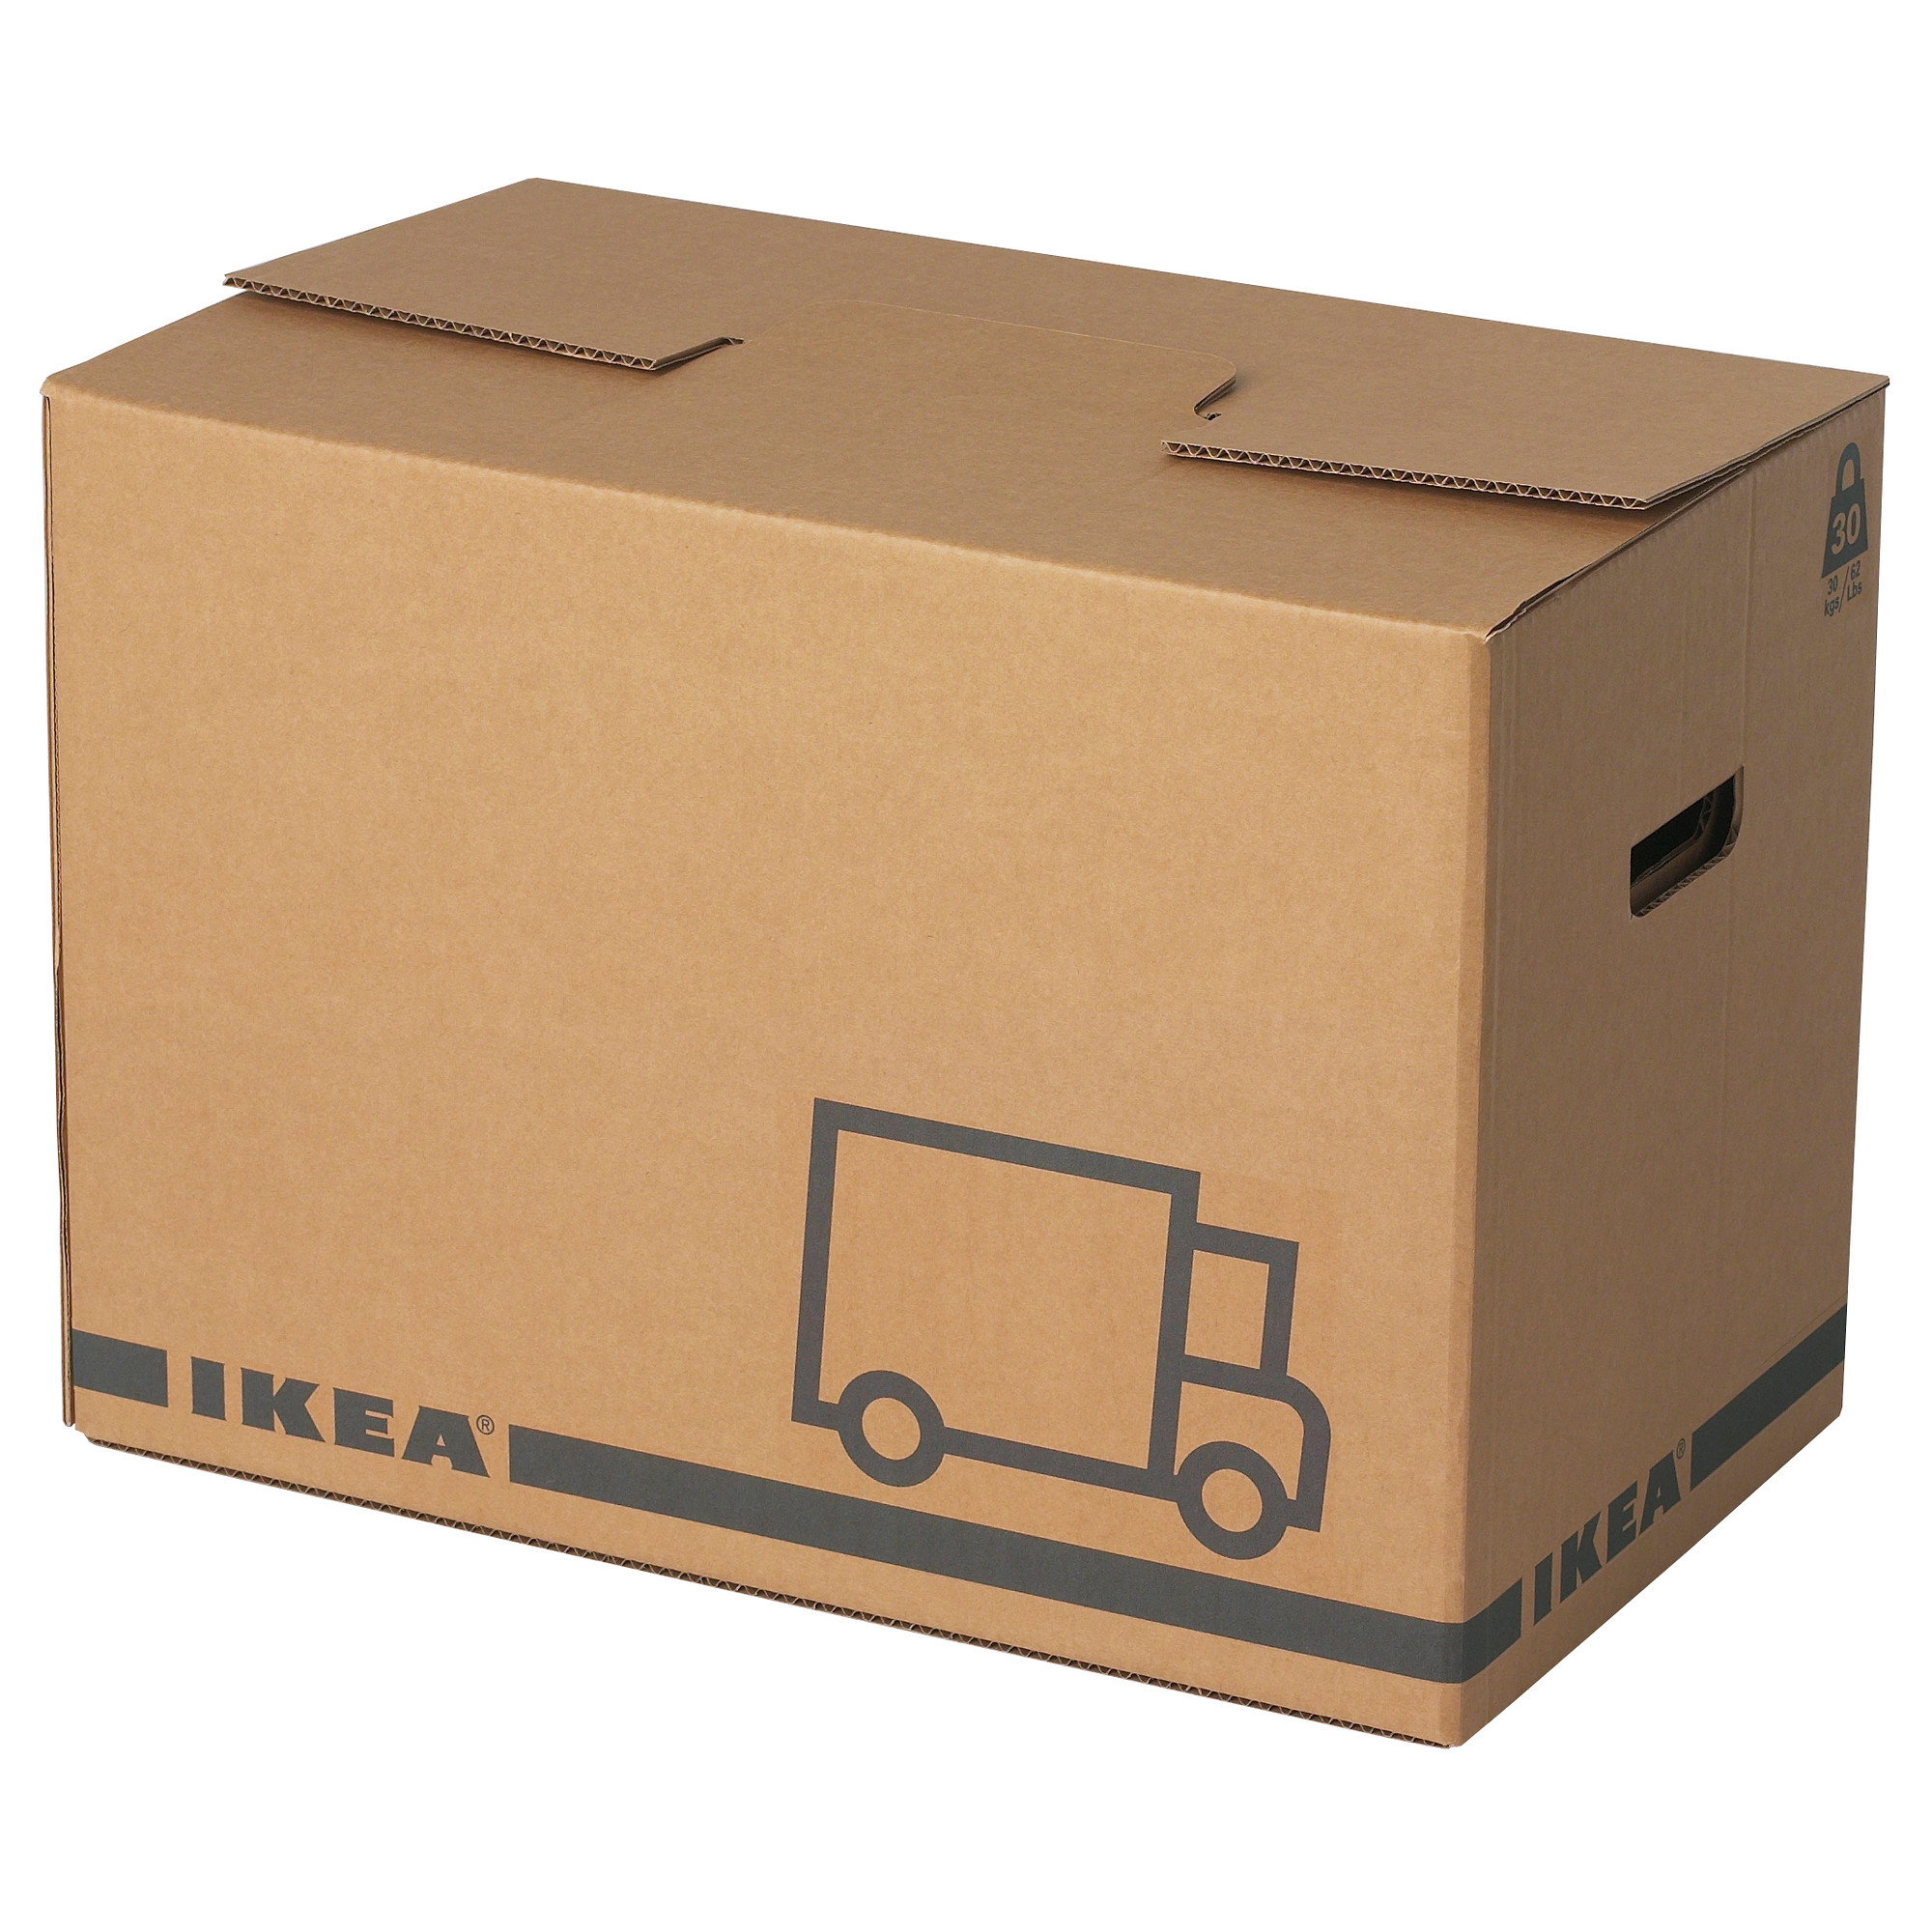 where to buy packing boxes for moving